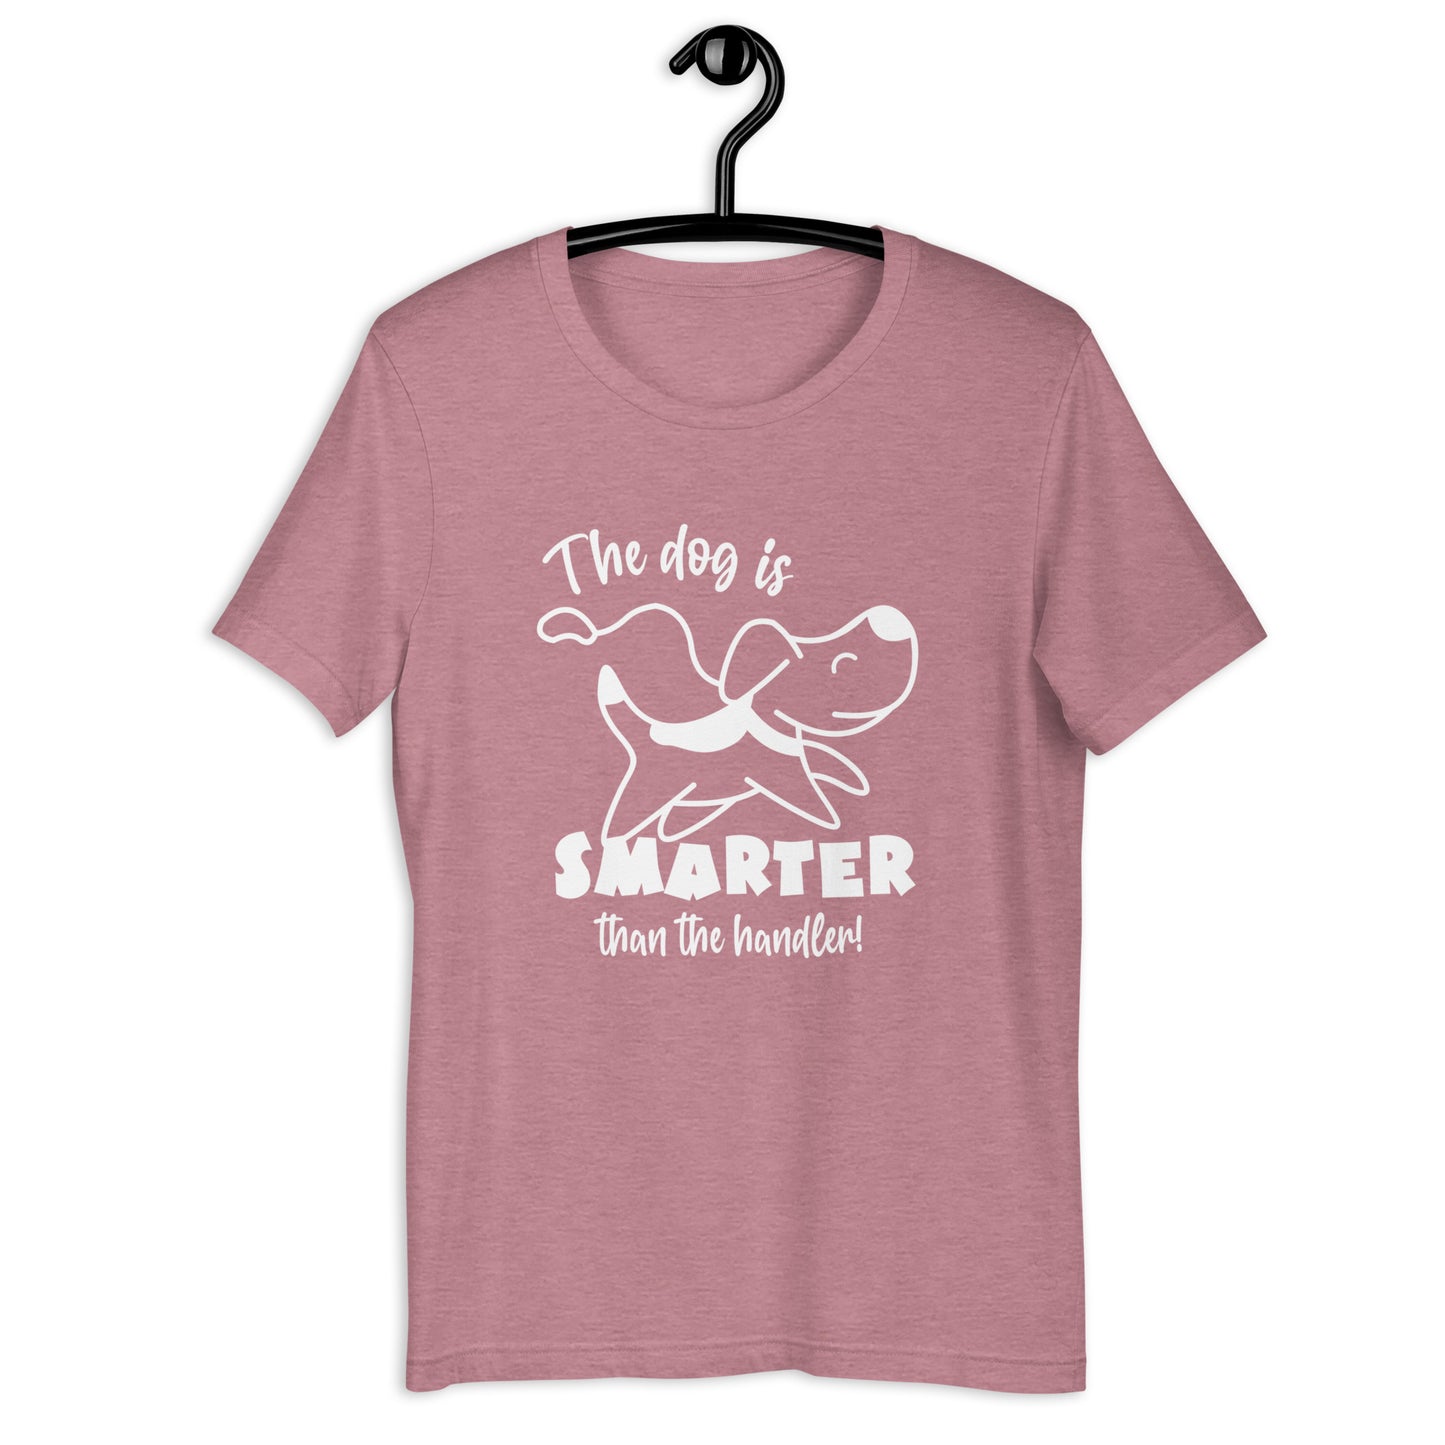 The dog is smarter than..Unisex t-shirt